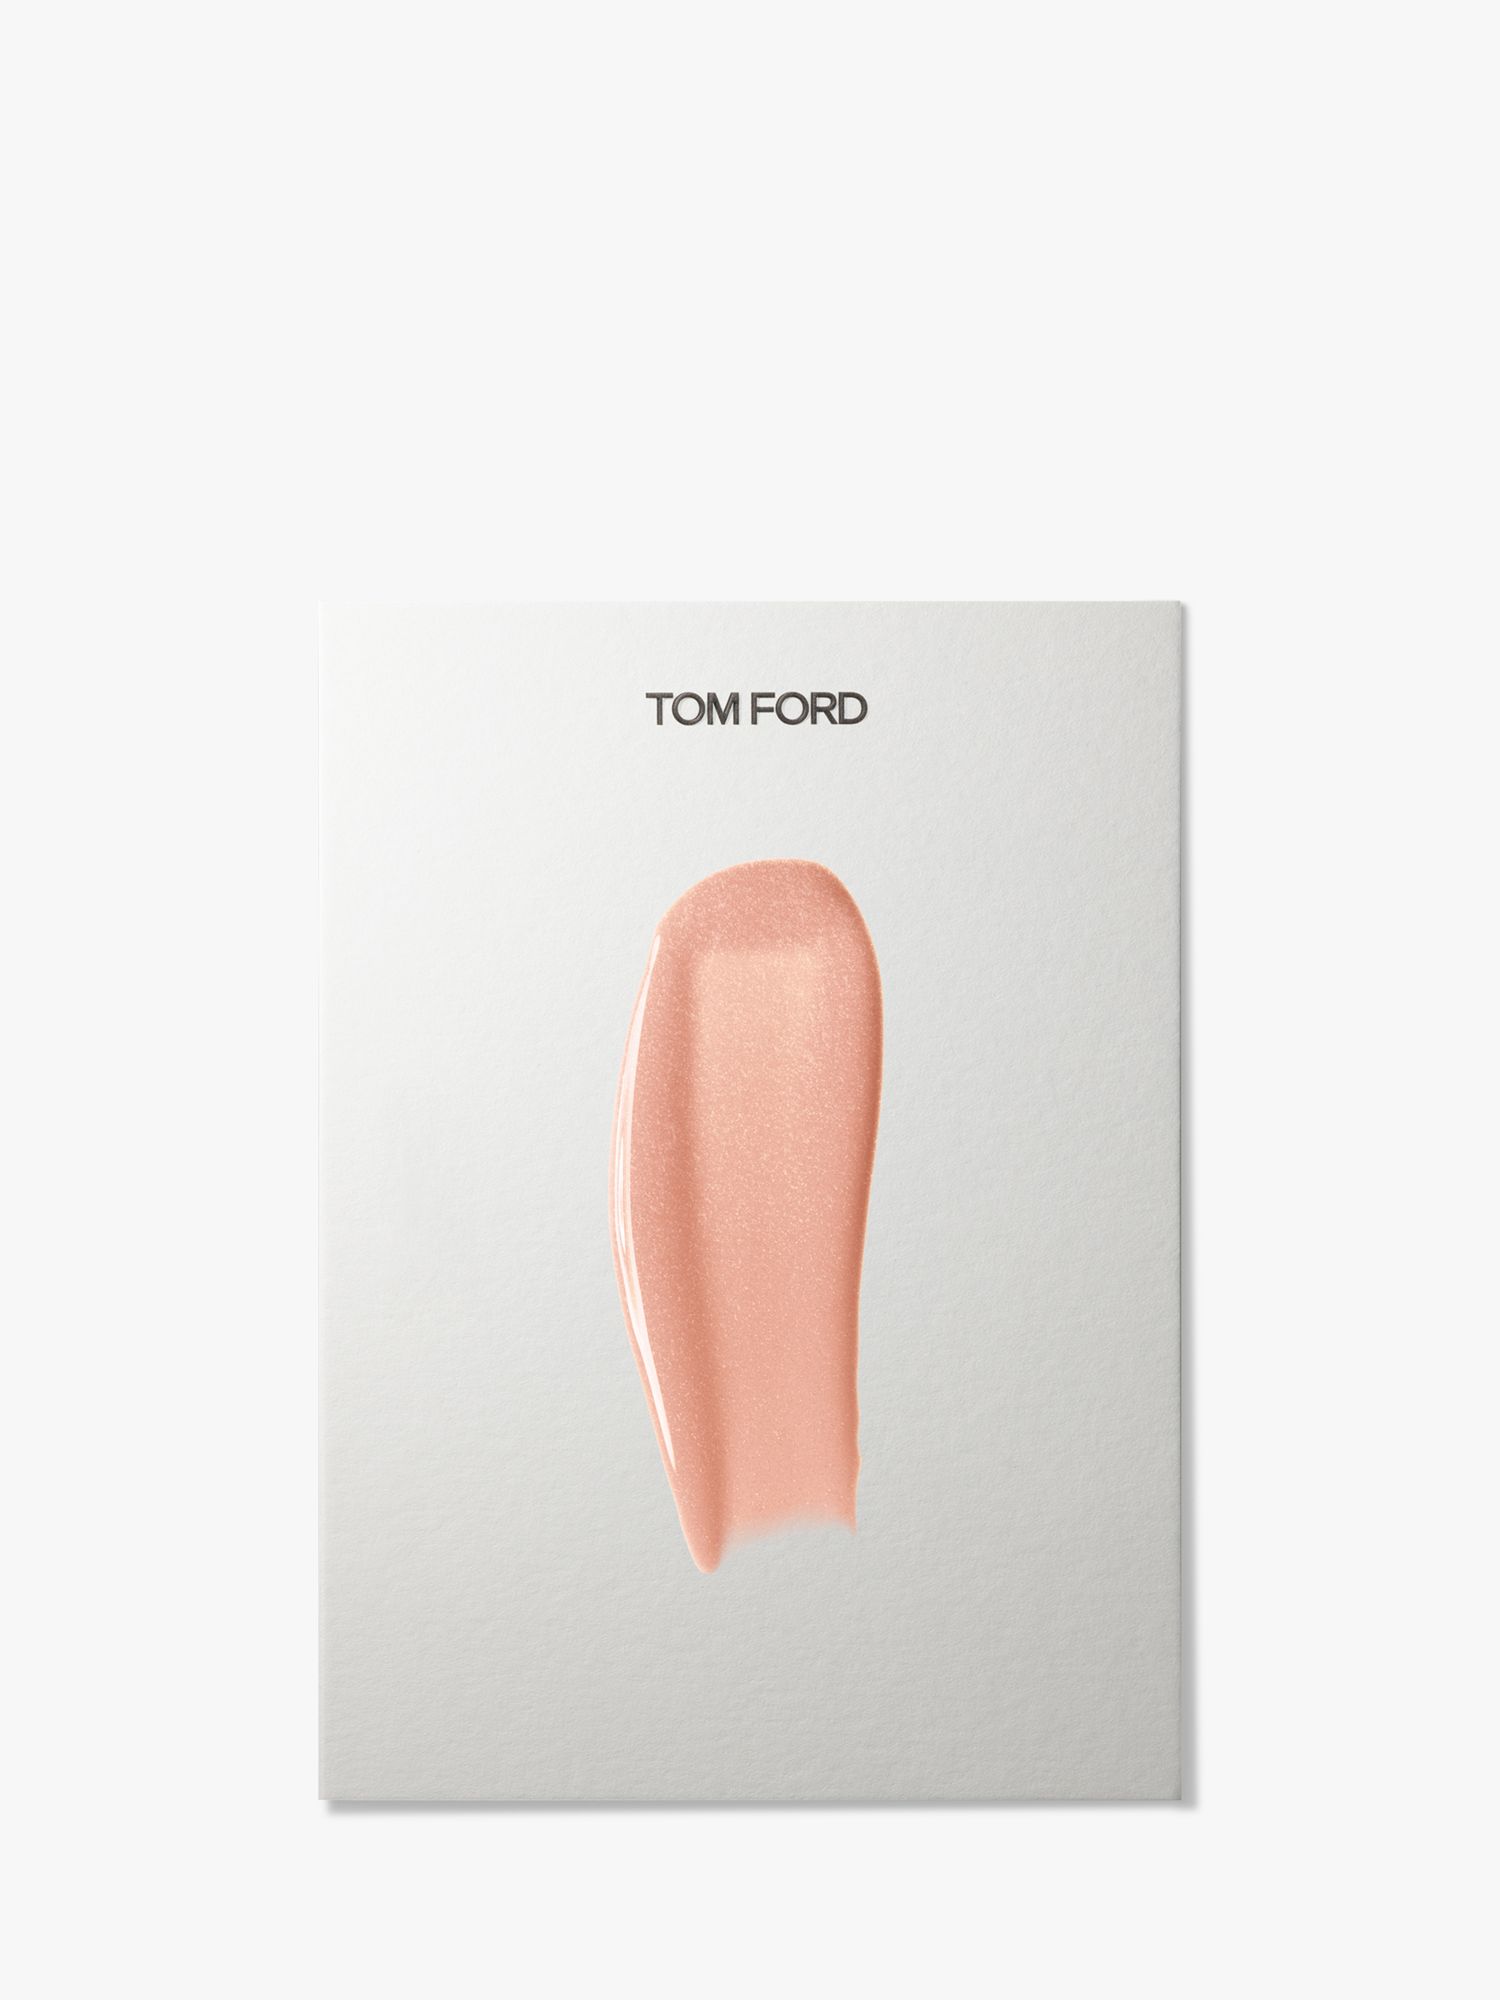 TOM FORD Gloss Luxe, 21 In The Buff at John Lewis & Partners